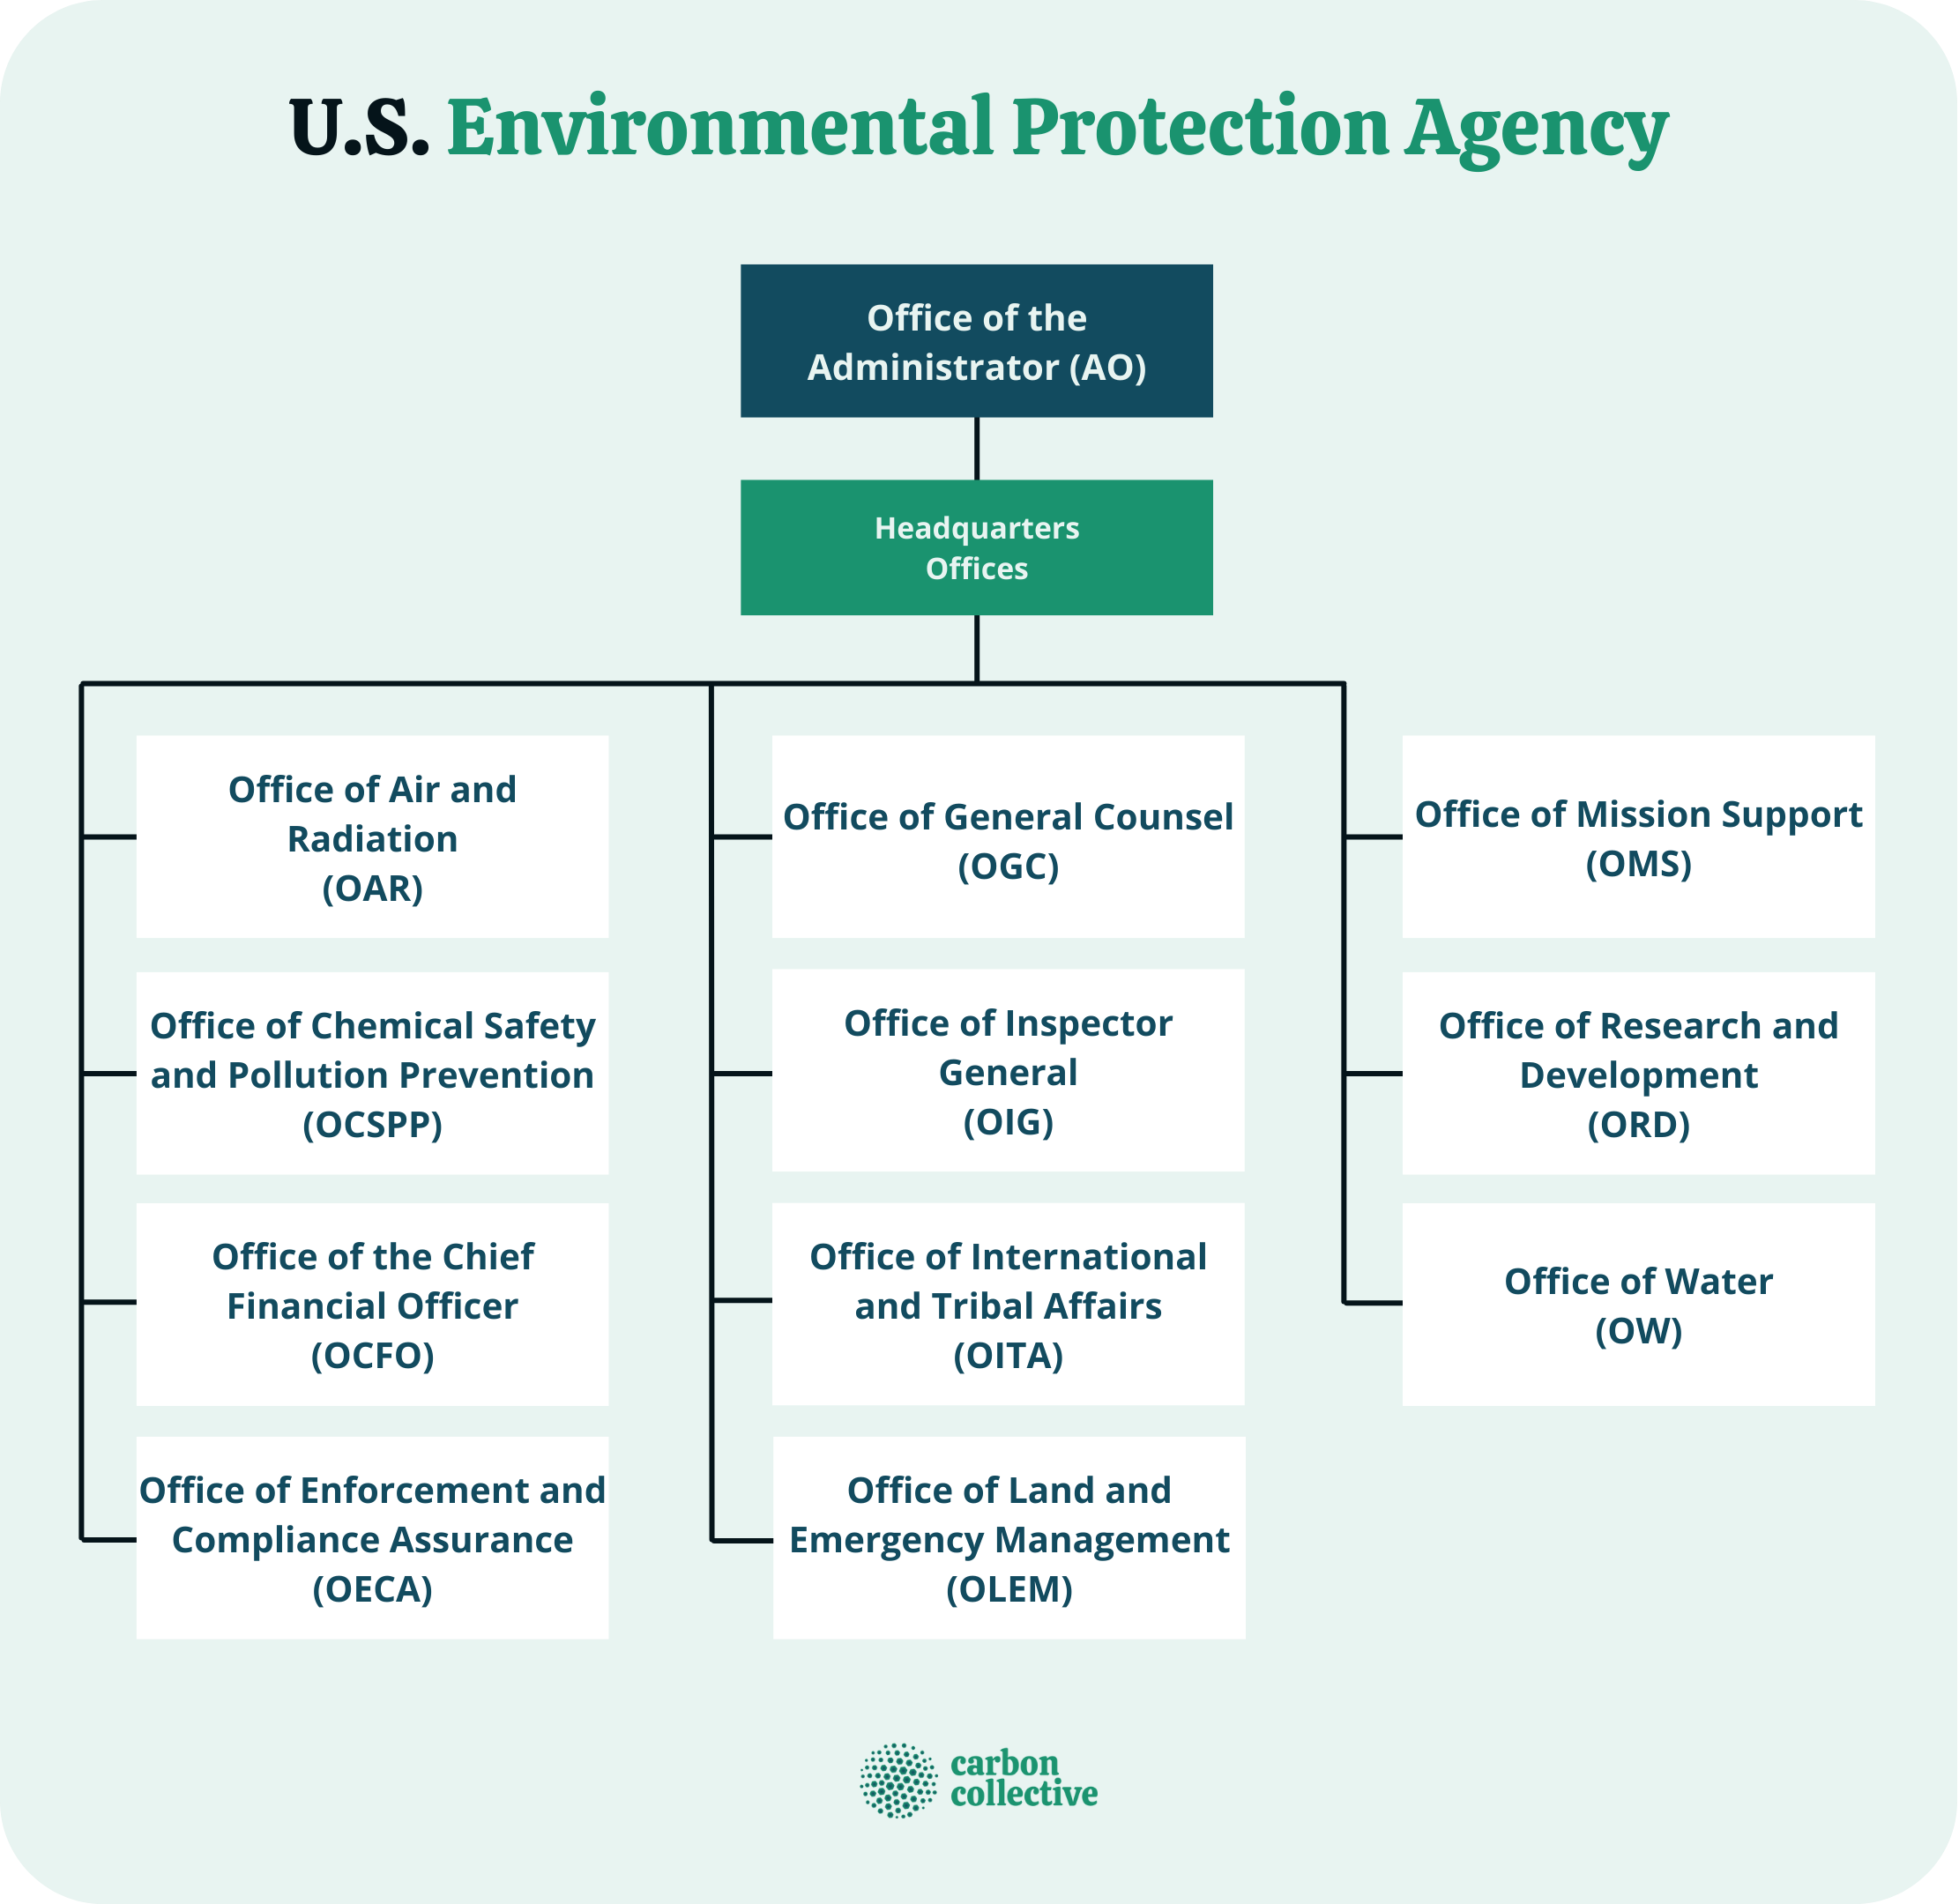 Solved The U.S. Environmental Protection Agency (EPA)